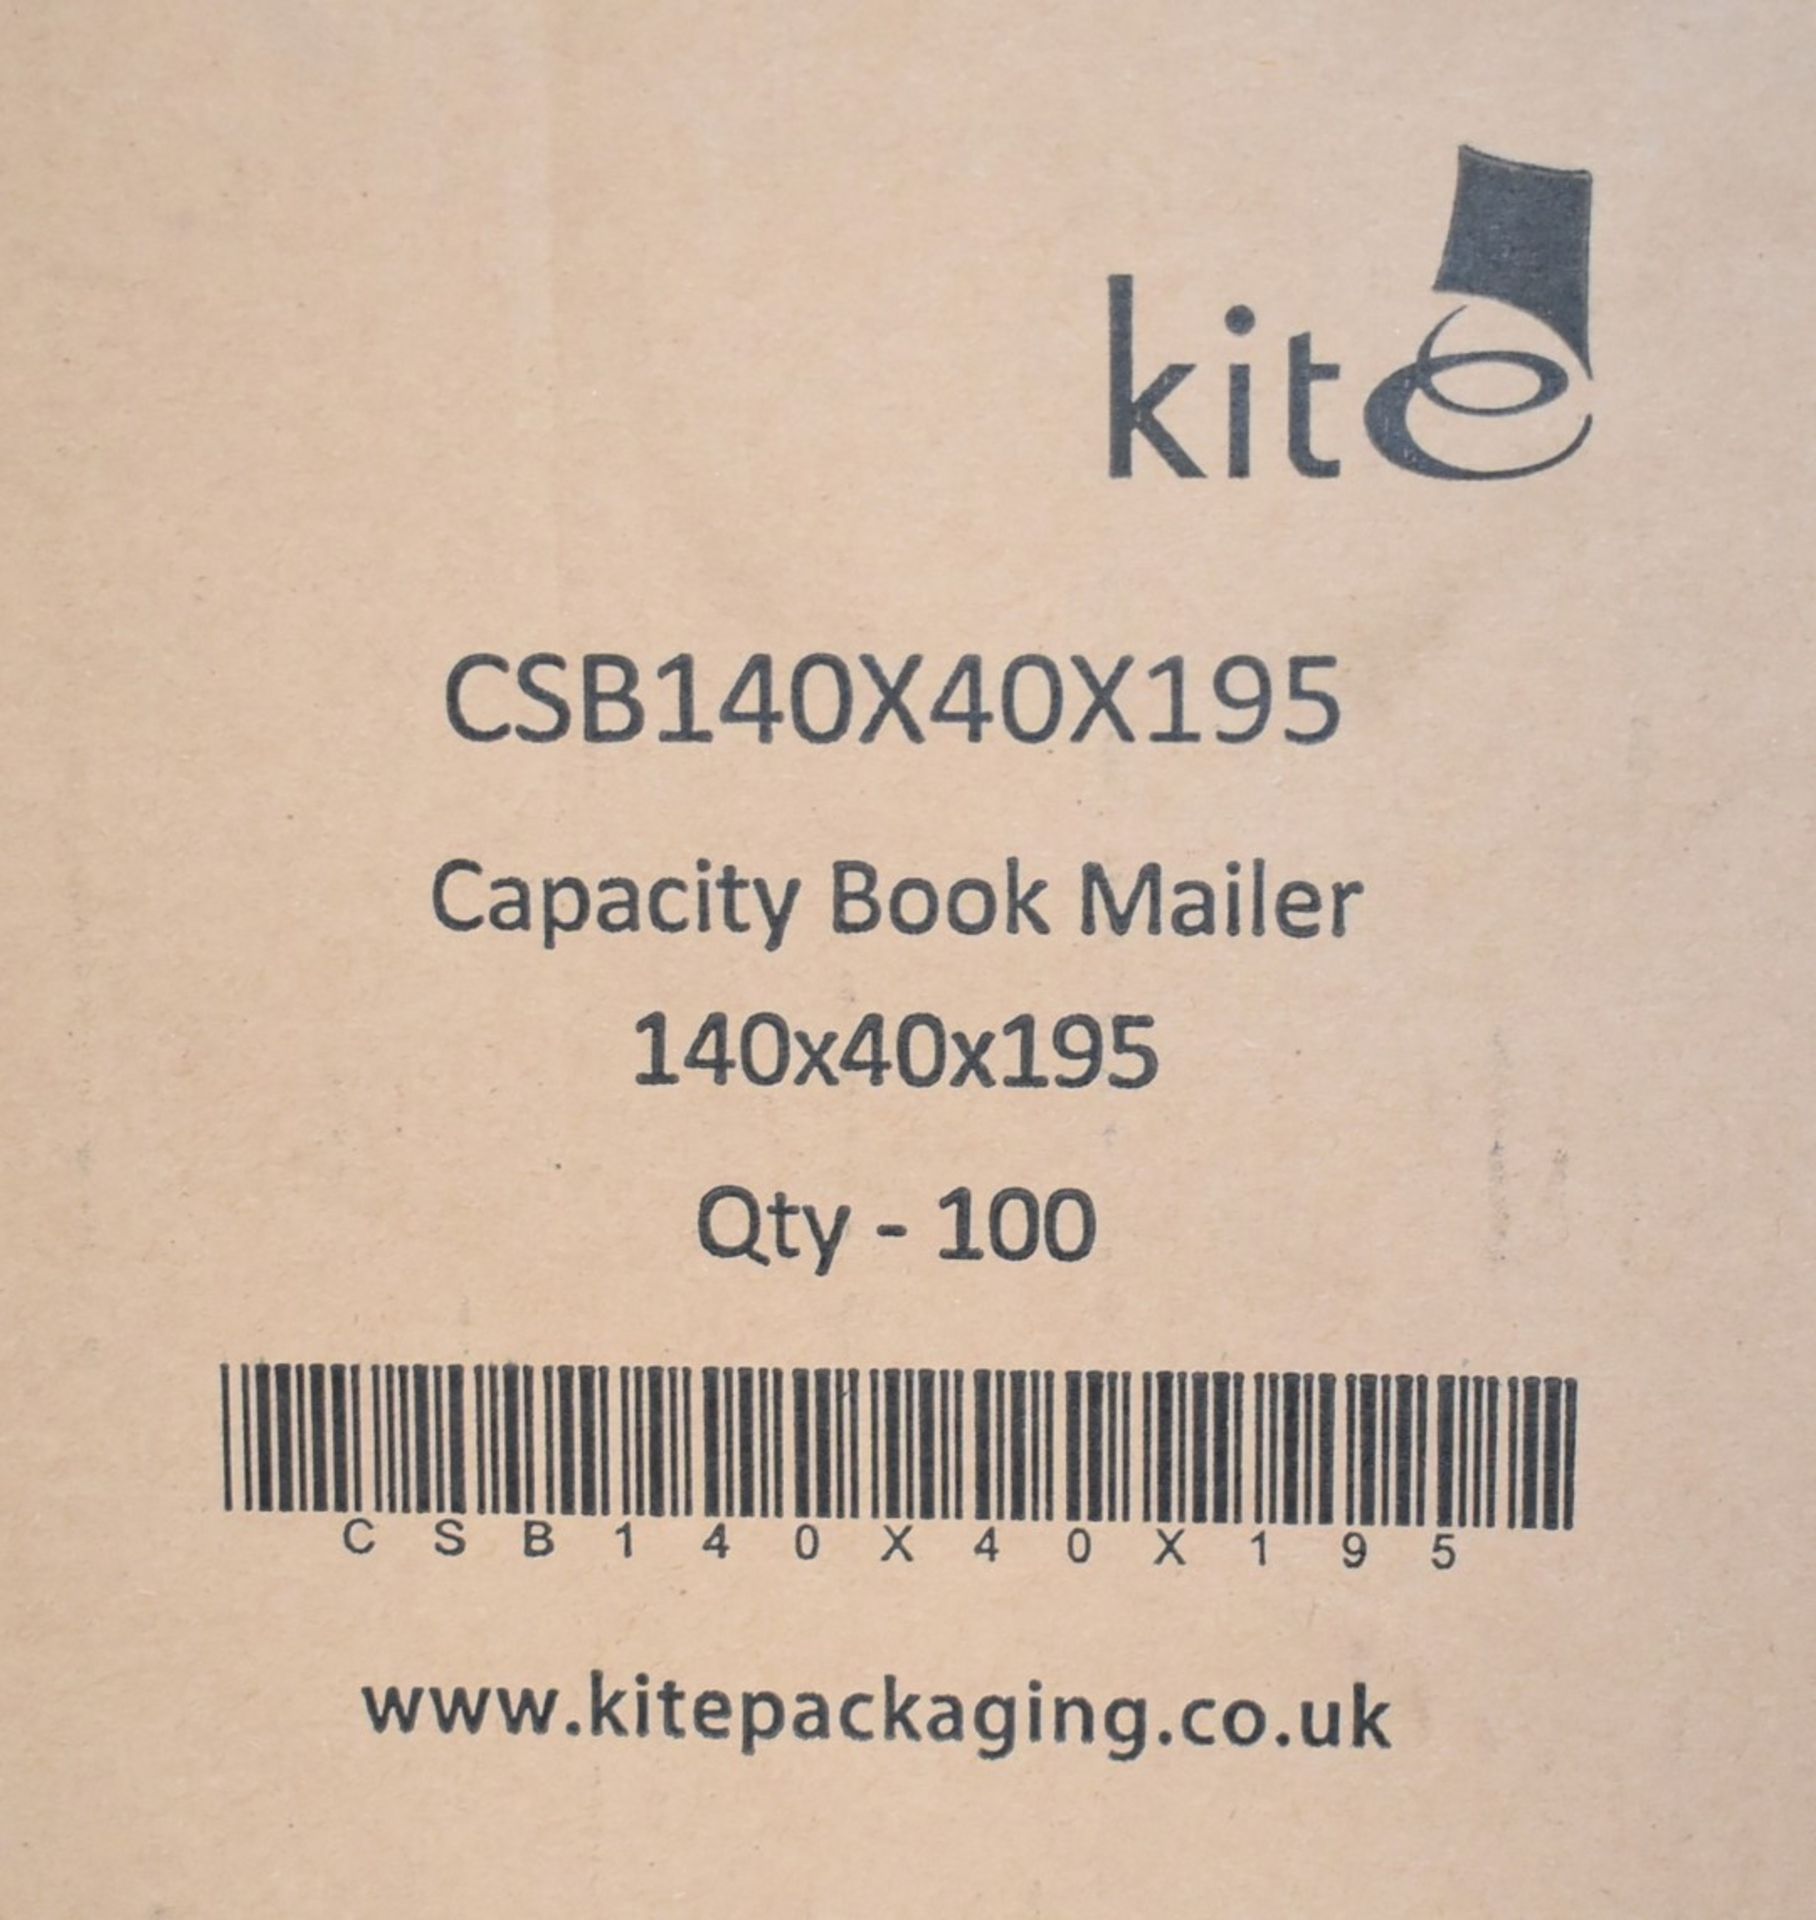 200 x Capacity Book Mailer Cardboard Envelopes - Size: 140 x 140 x 195mm - Includes 2 x Boxes of 100 - Image 4 of 6